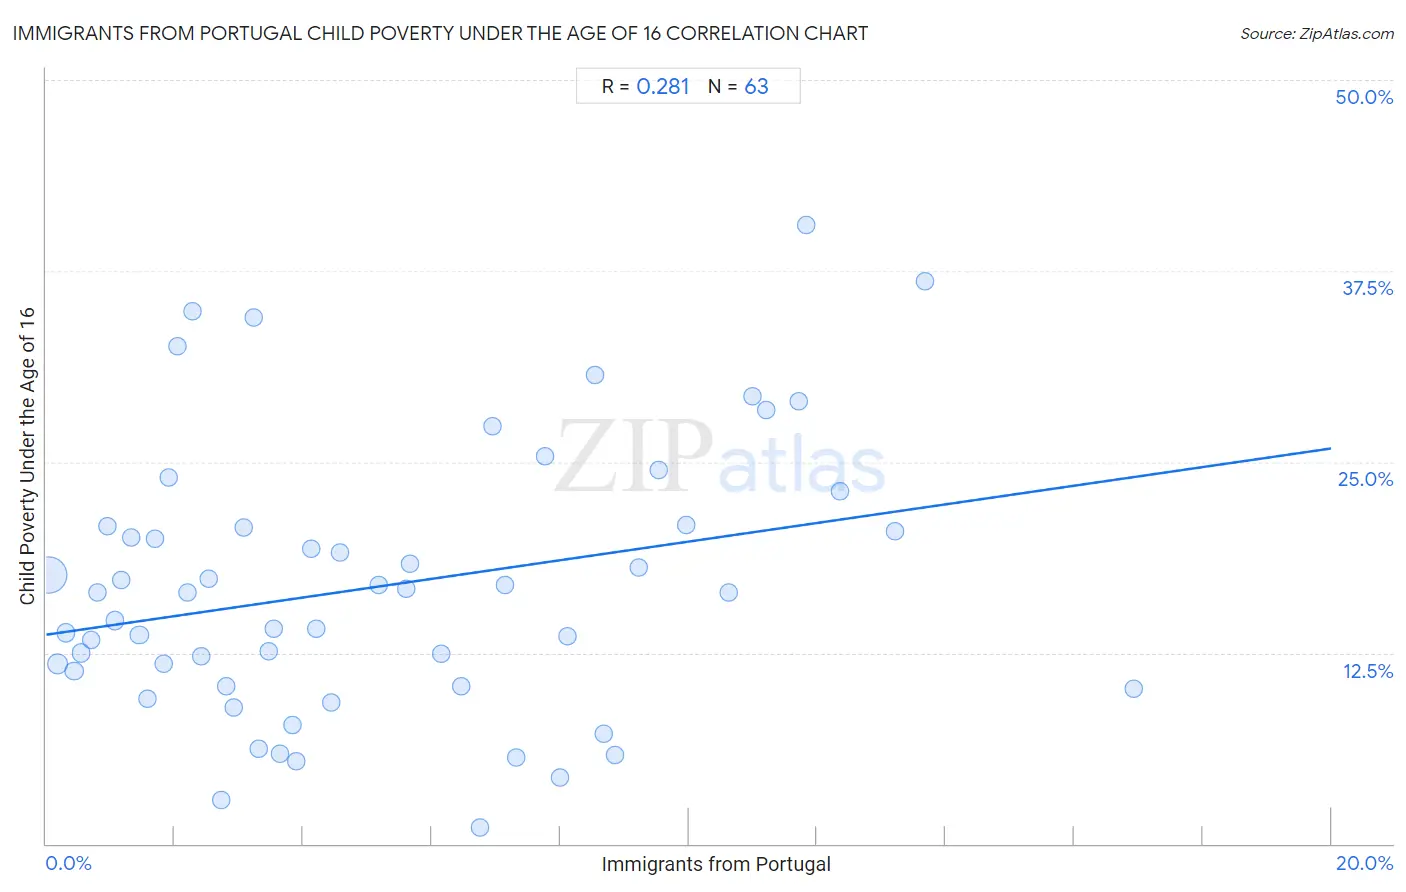 Immigrants from Portugal Child Poverty Under the Age of 16